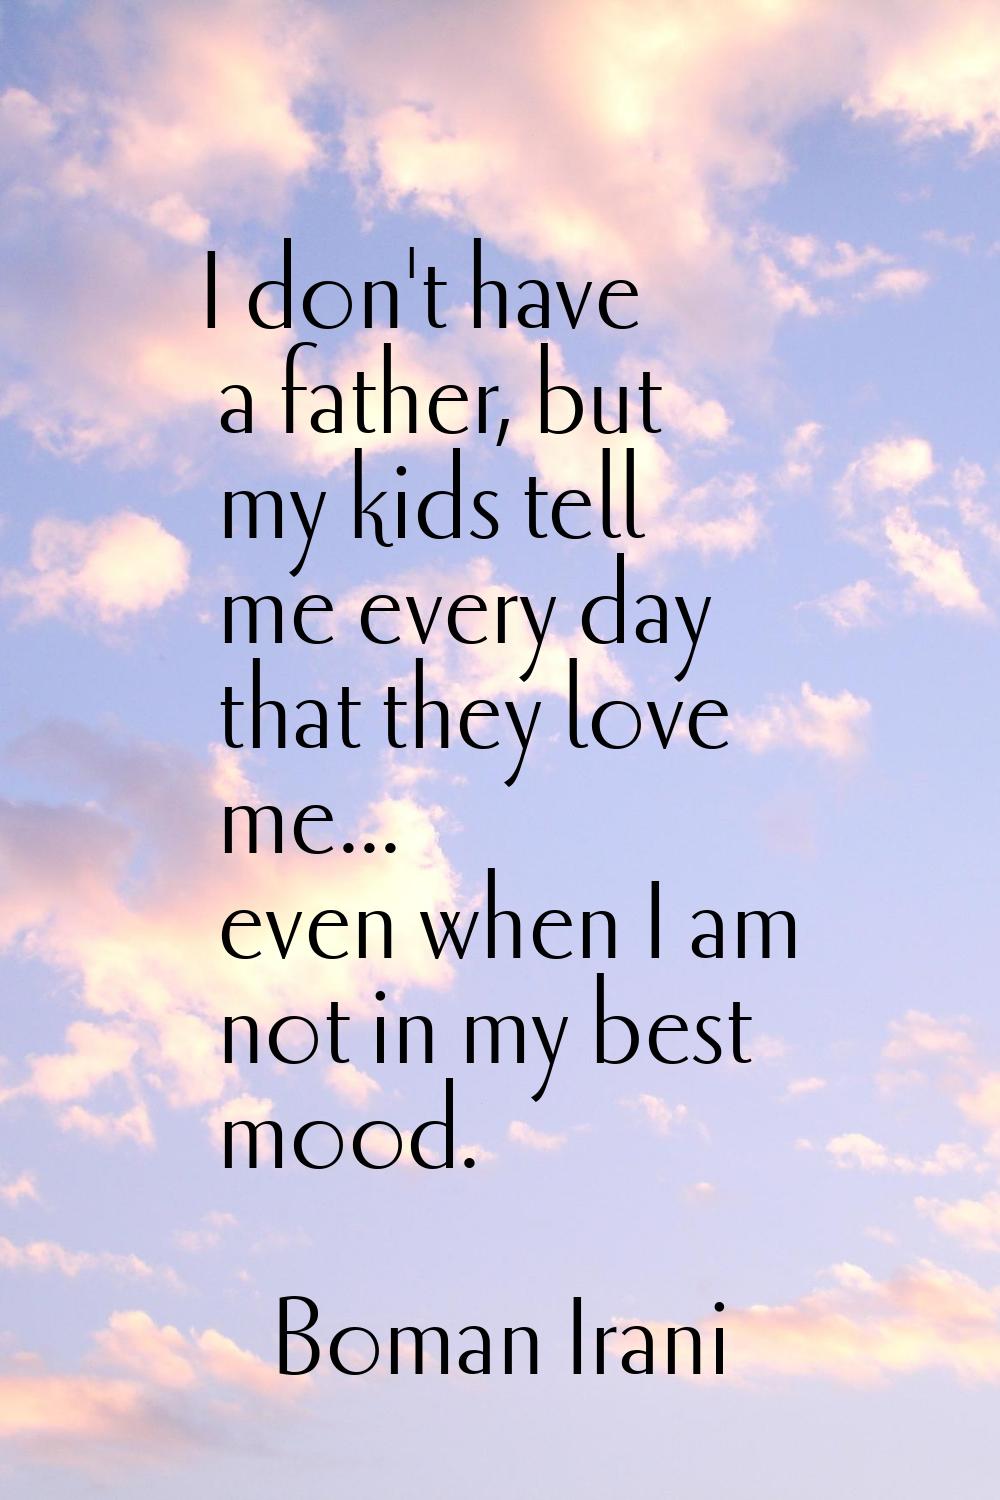 I don't have a father, but my kids tell me every day that they love me... even when I am not in my 